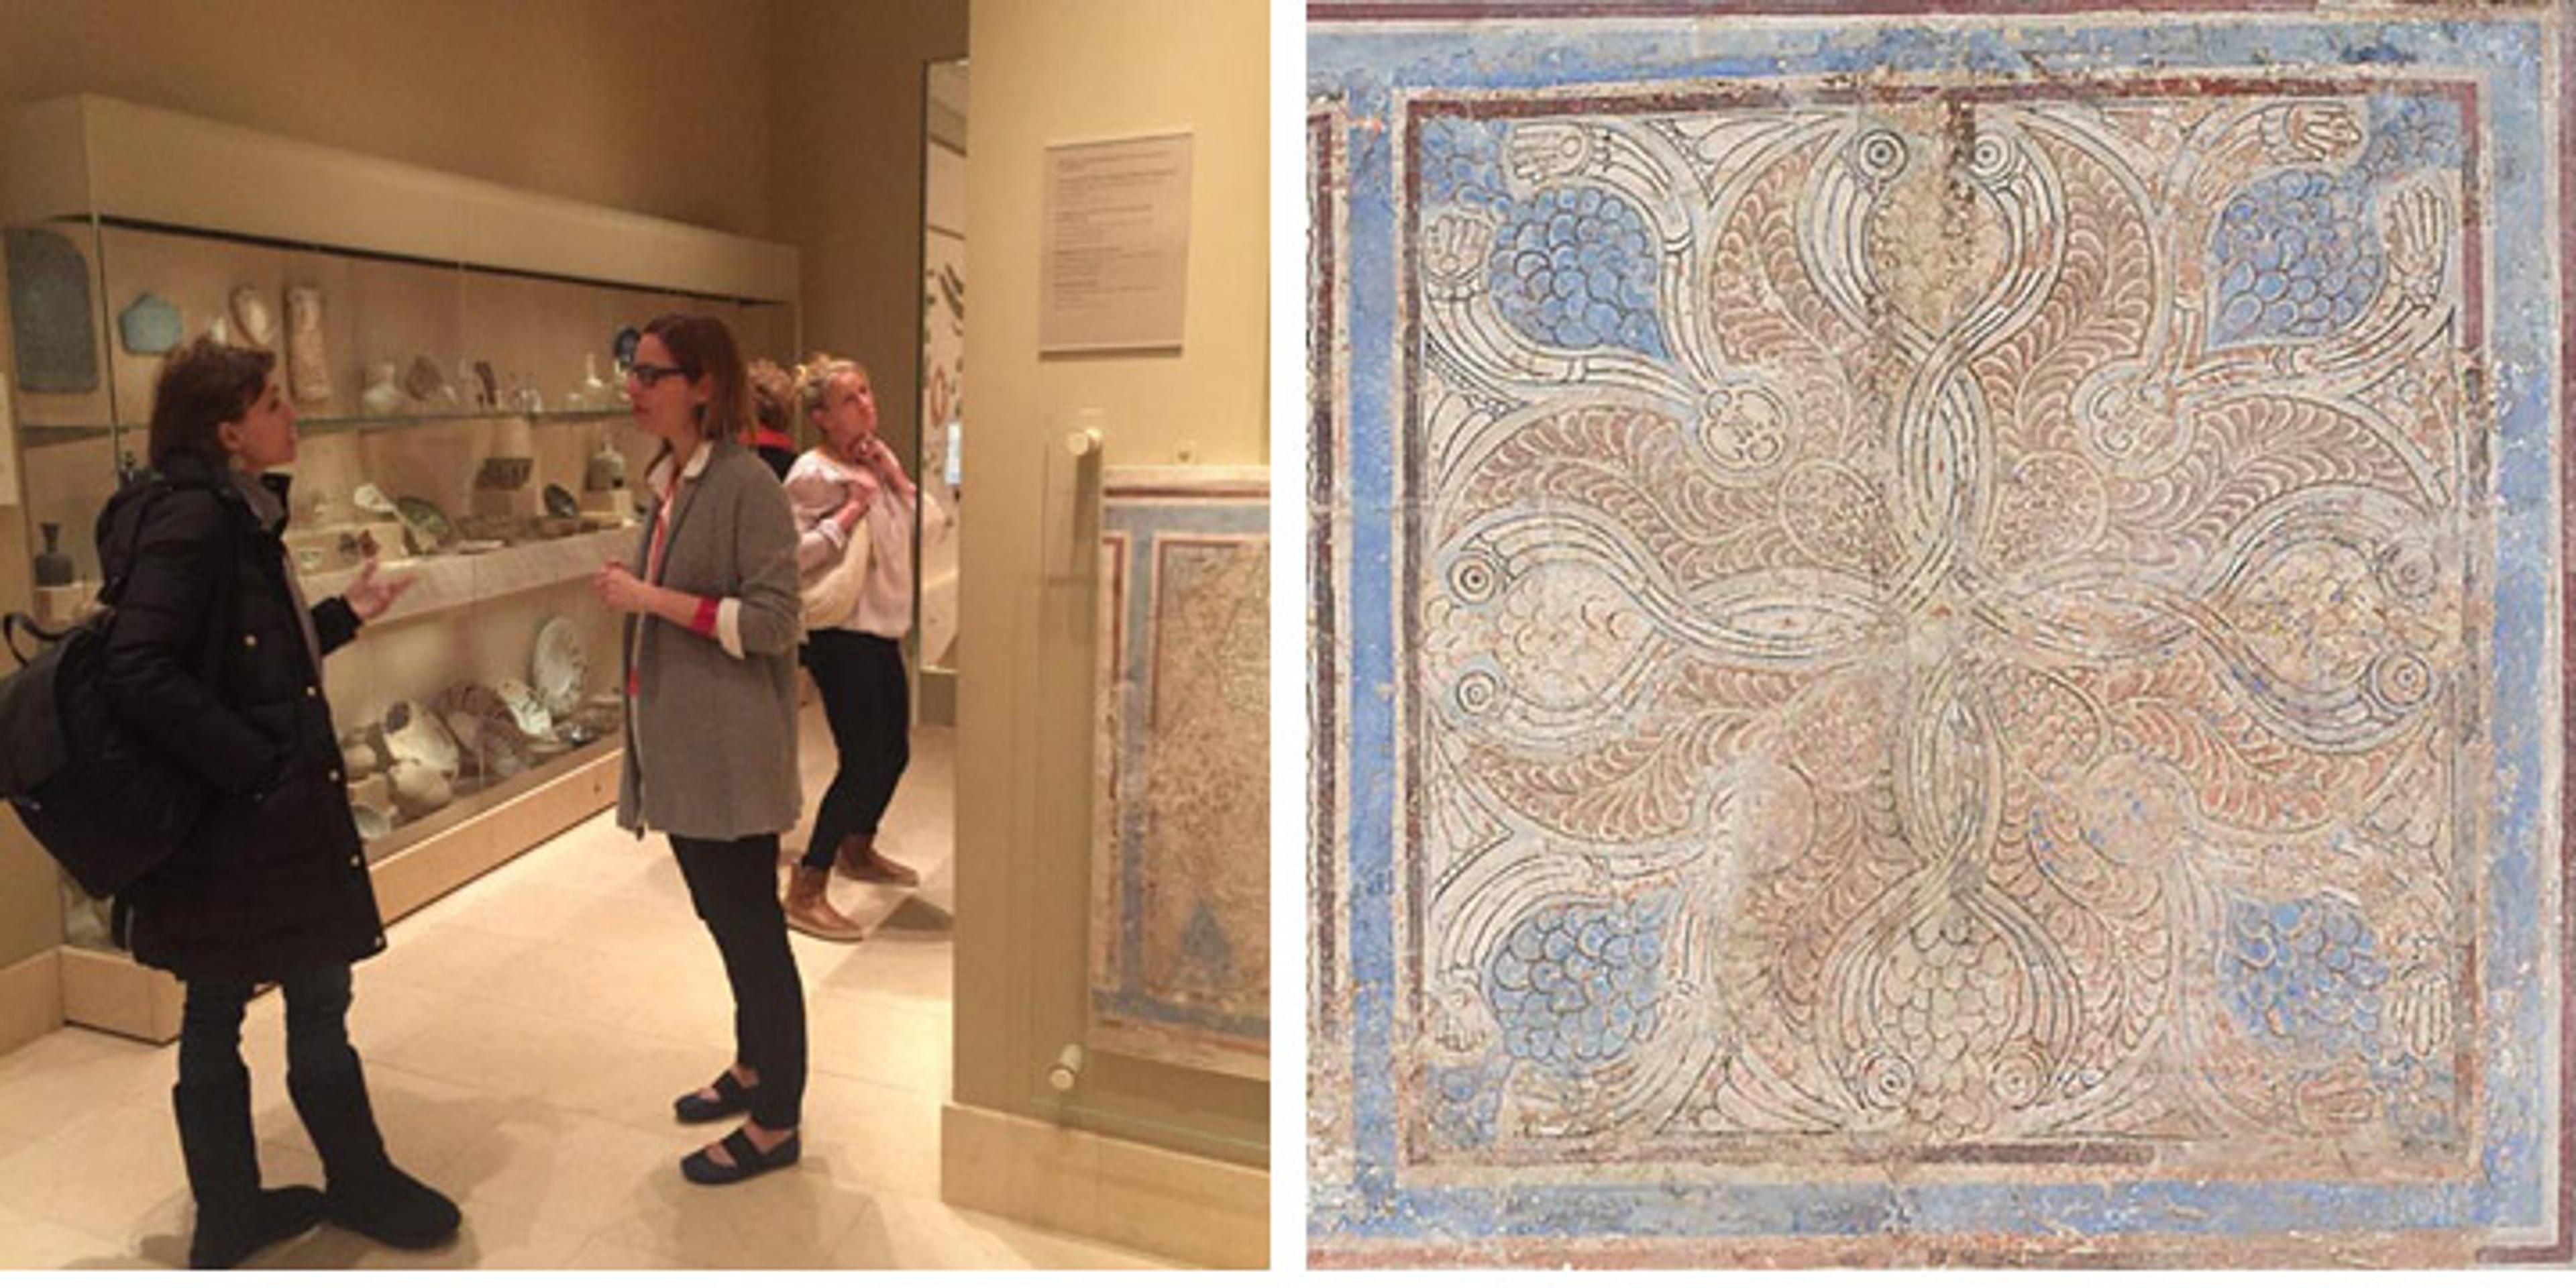 Curator discussing painted dado panel from Iran with visitor; image of painted panel 